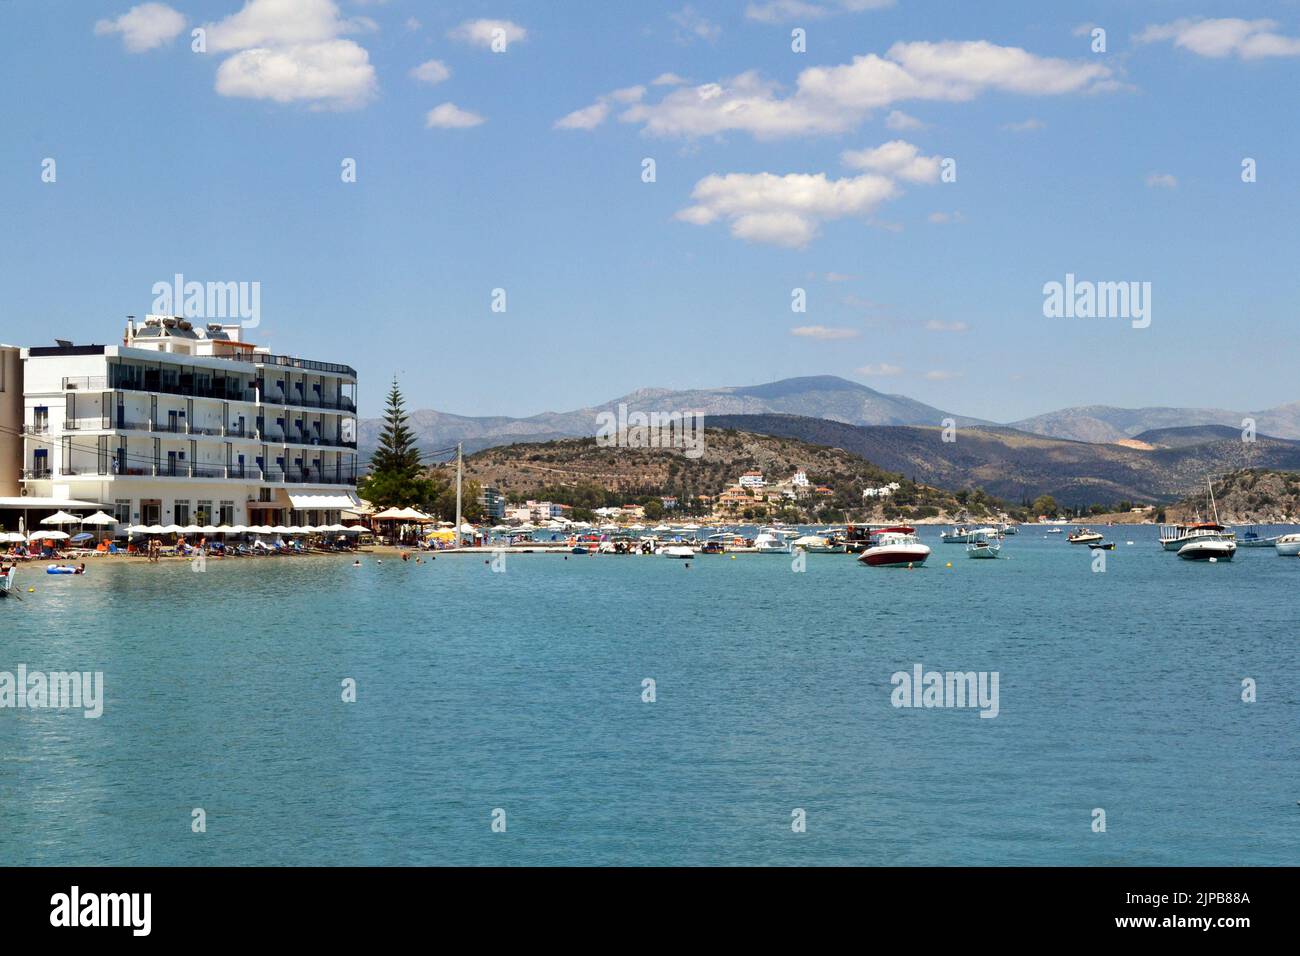 Tolo, a small village in Greece on the Peloponnese peninsula. Stock Photo